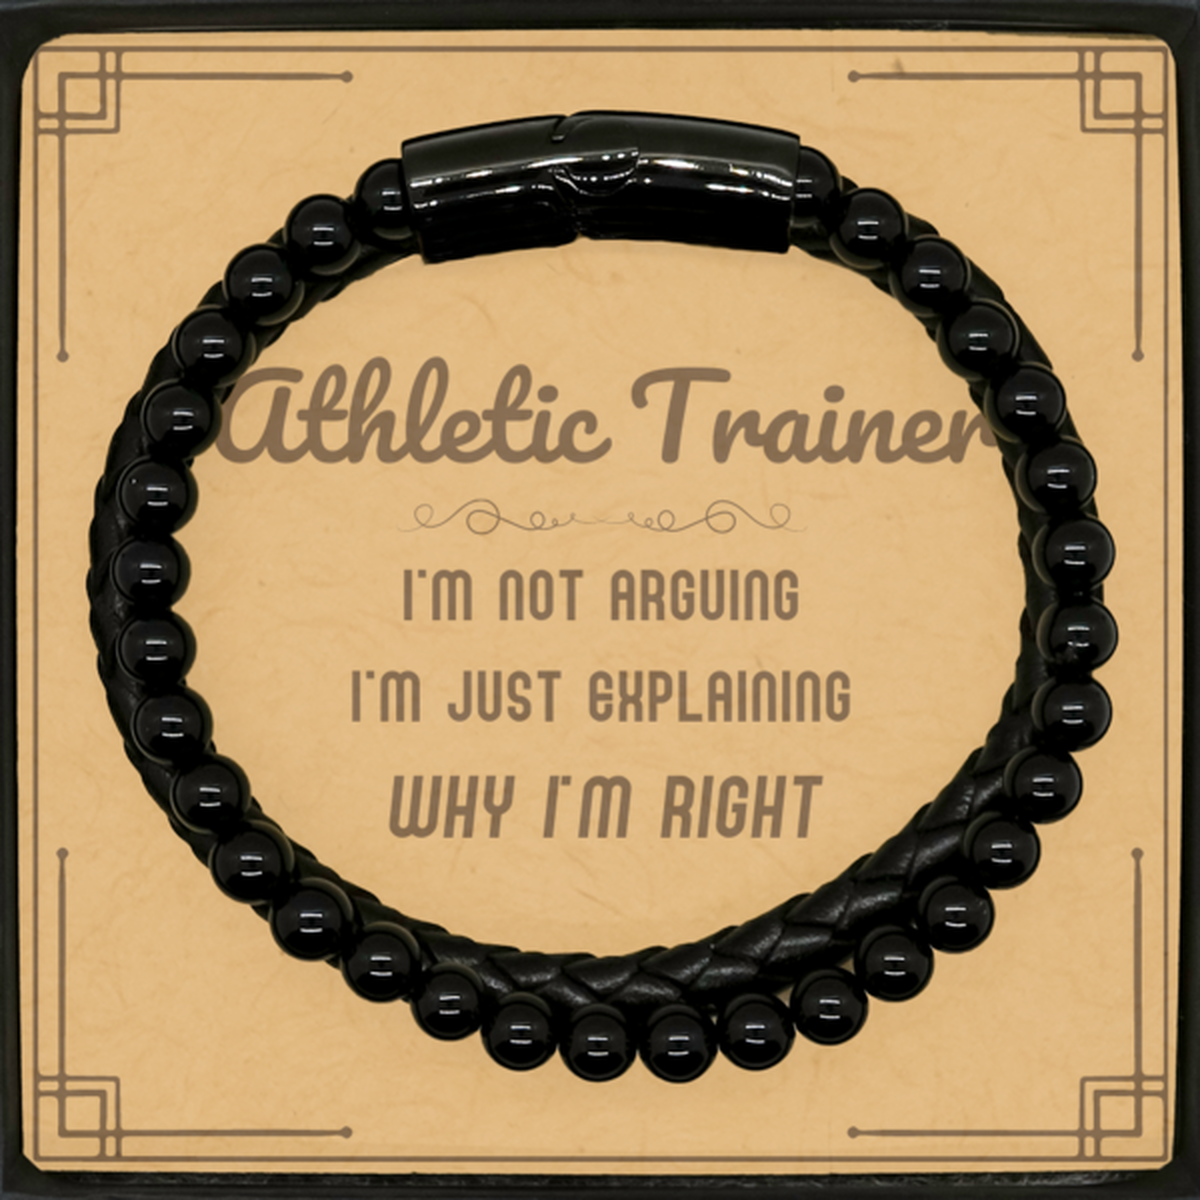 Athletic Trainer I'm not Arguing. I'm Just Explaining Why I'm RIGHT Stone Leather Bracelets, Funny Saying Quote Athletic Trainer Gifts For Athletic Trainer Message Card Graduation Birthday Christmas Gifts for Men Women Coworker